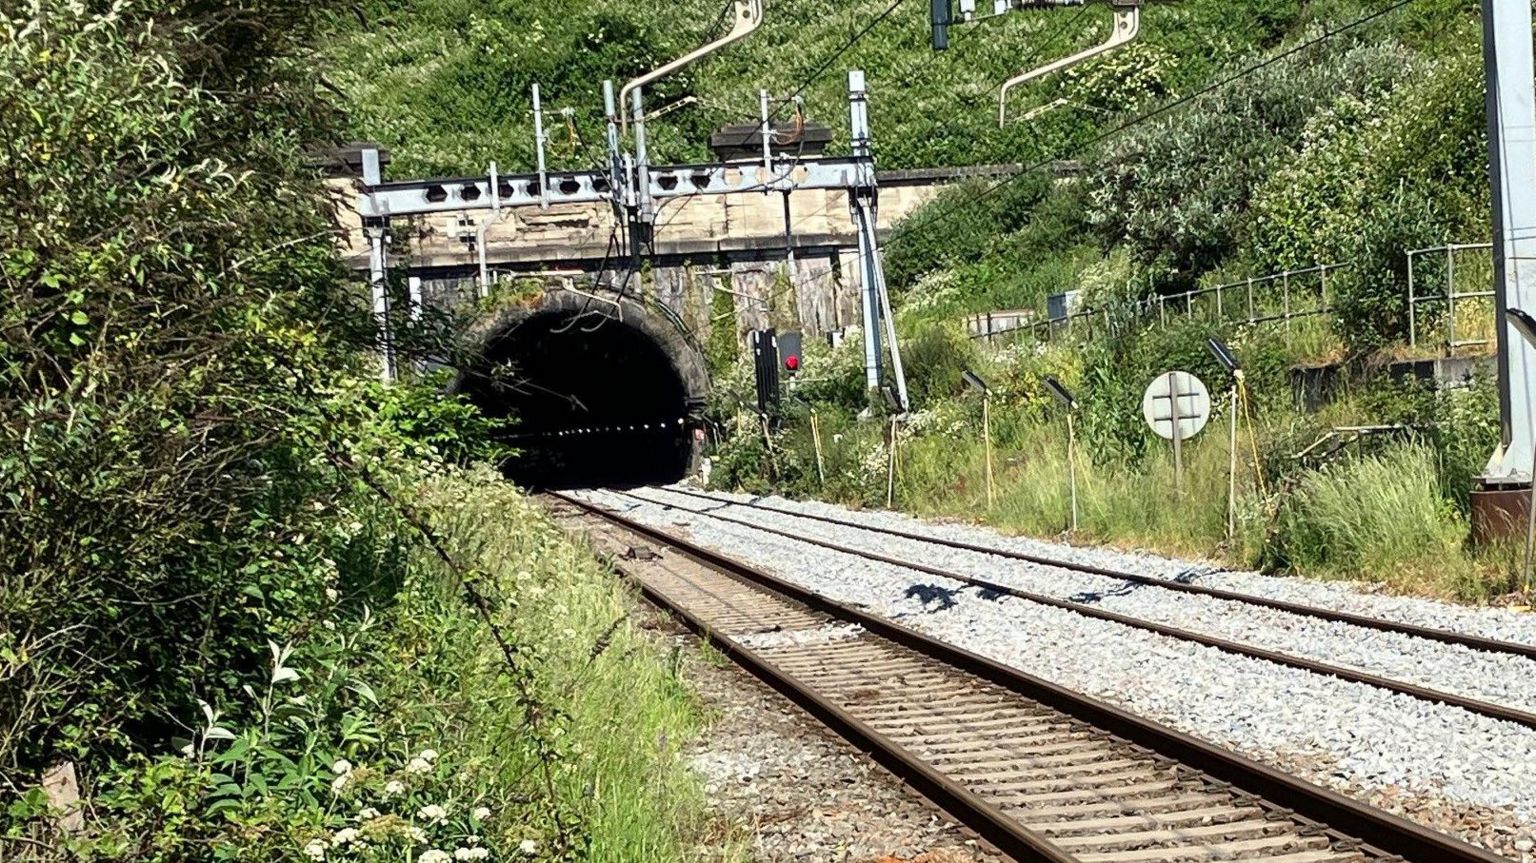 The English entrance to the Severn Tunnel